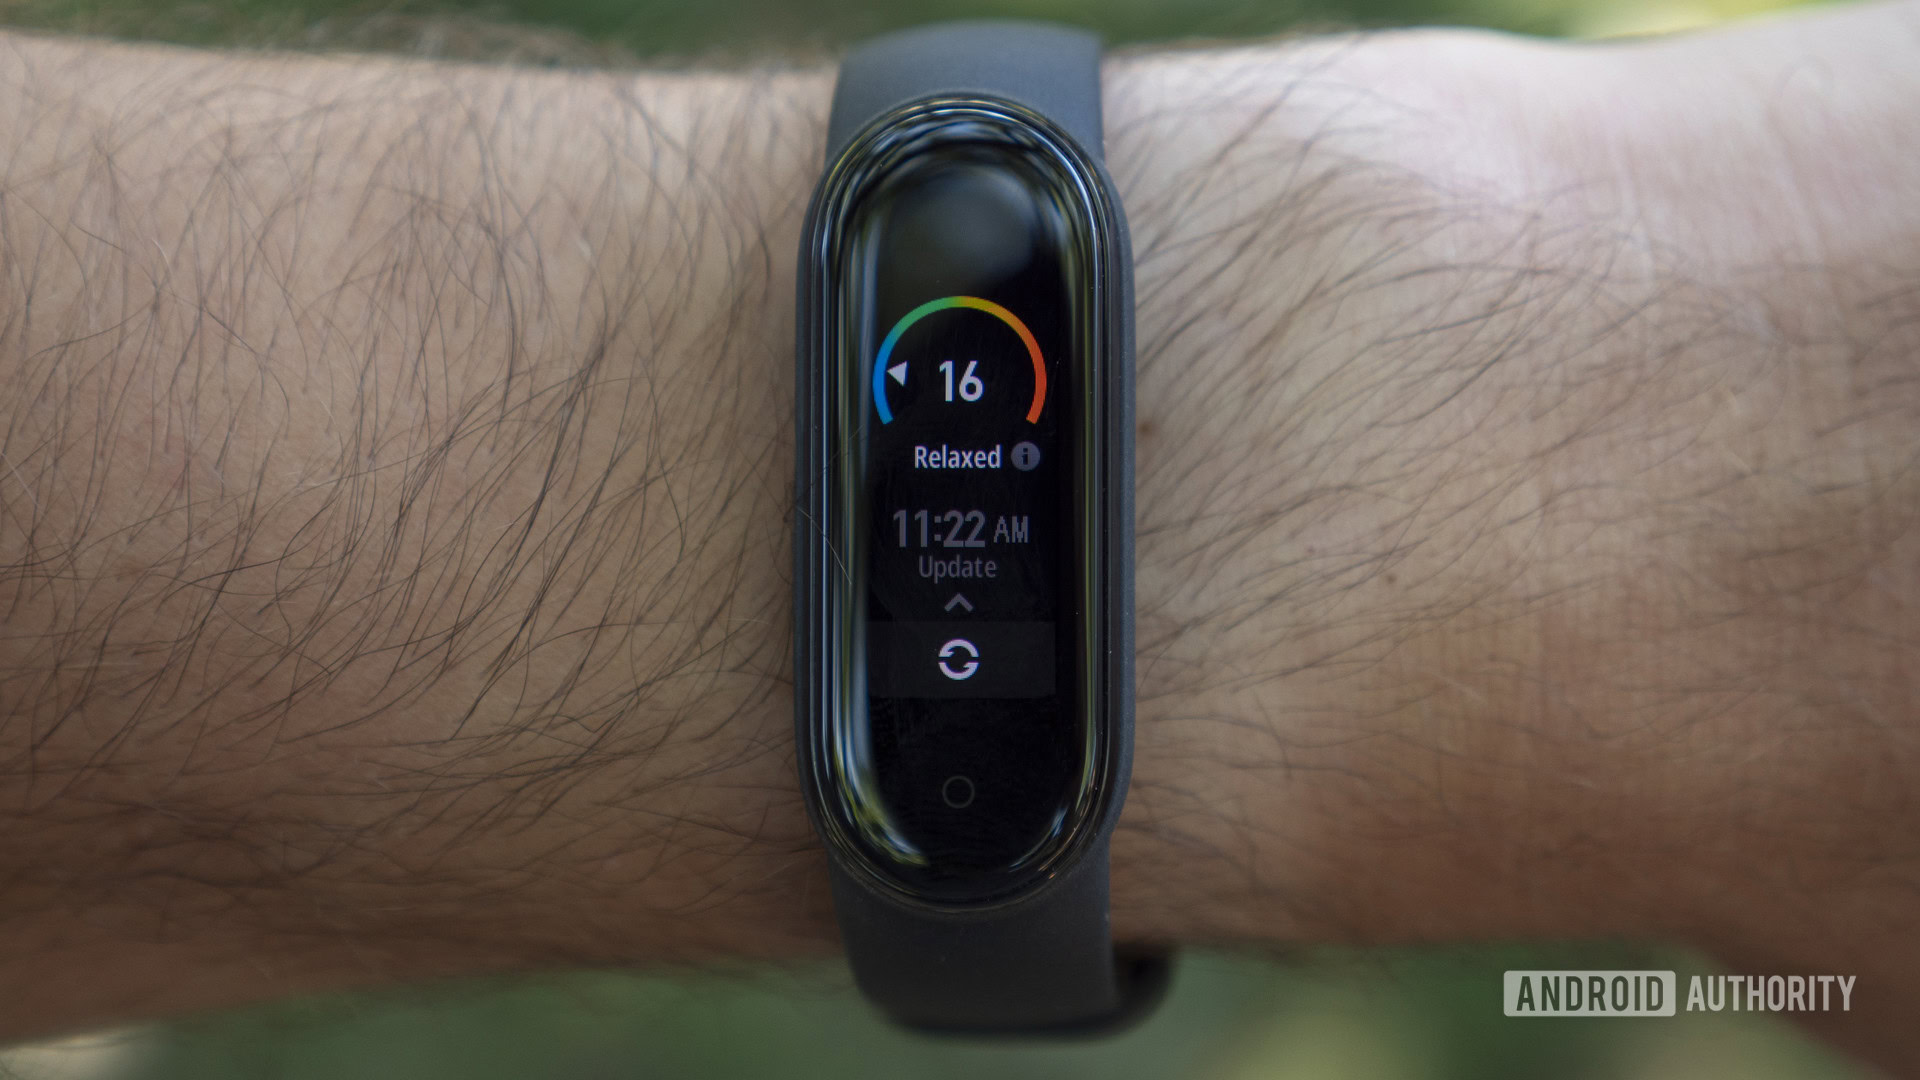 Does the Xiaomi Mi Band 5 work with Mi Band 4 bands? - Android Authority